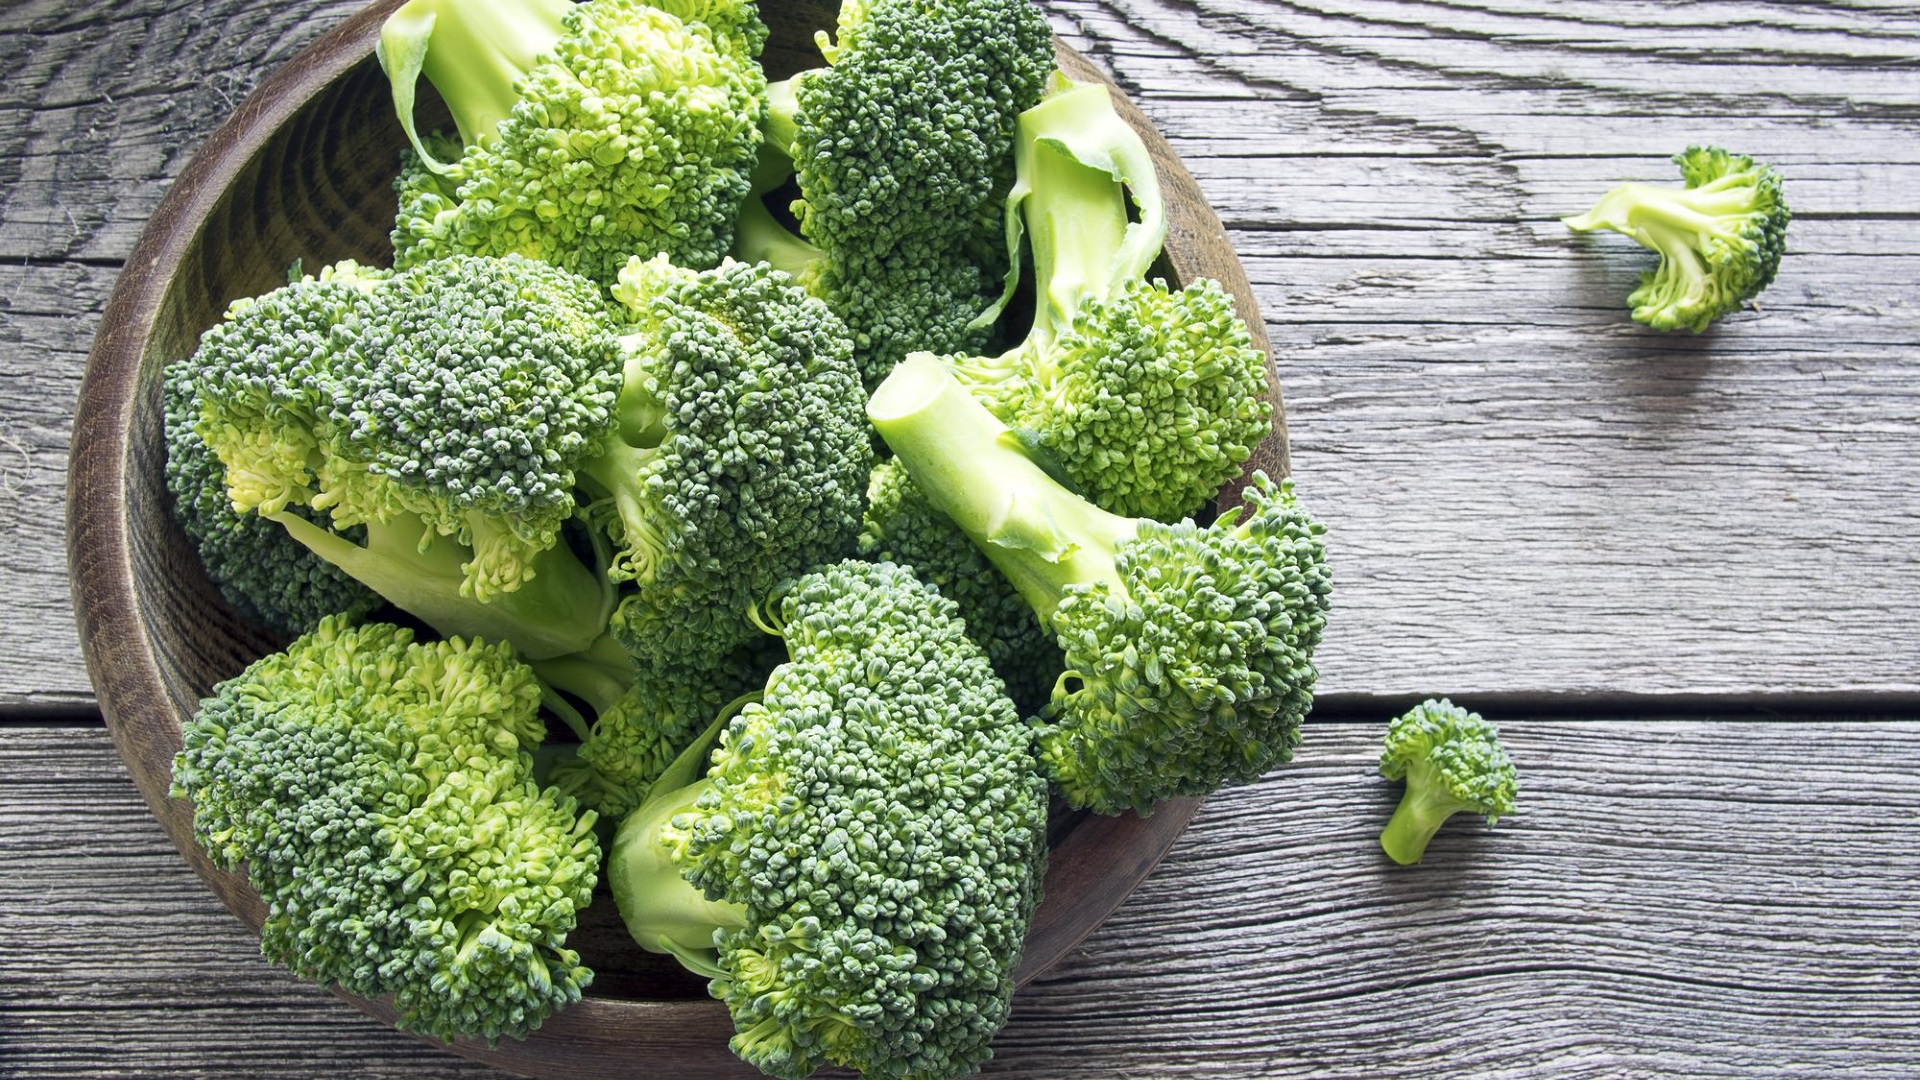 Can You Grow Broccoli in Hydroponics?